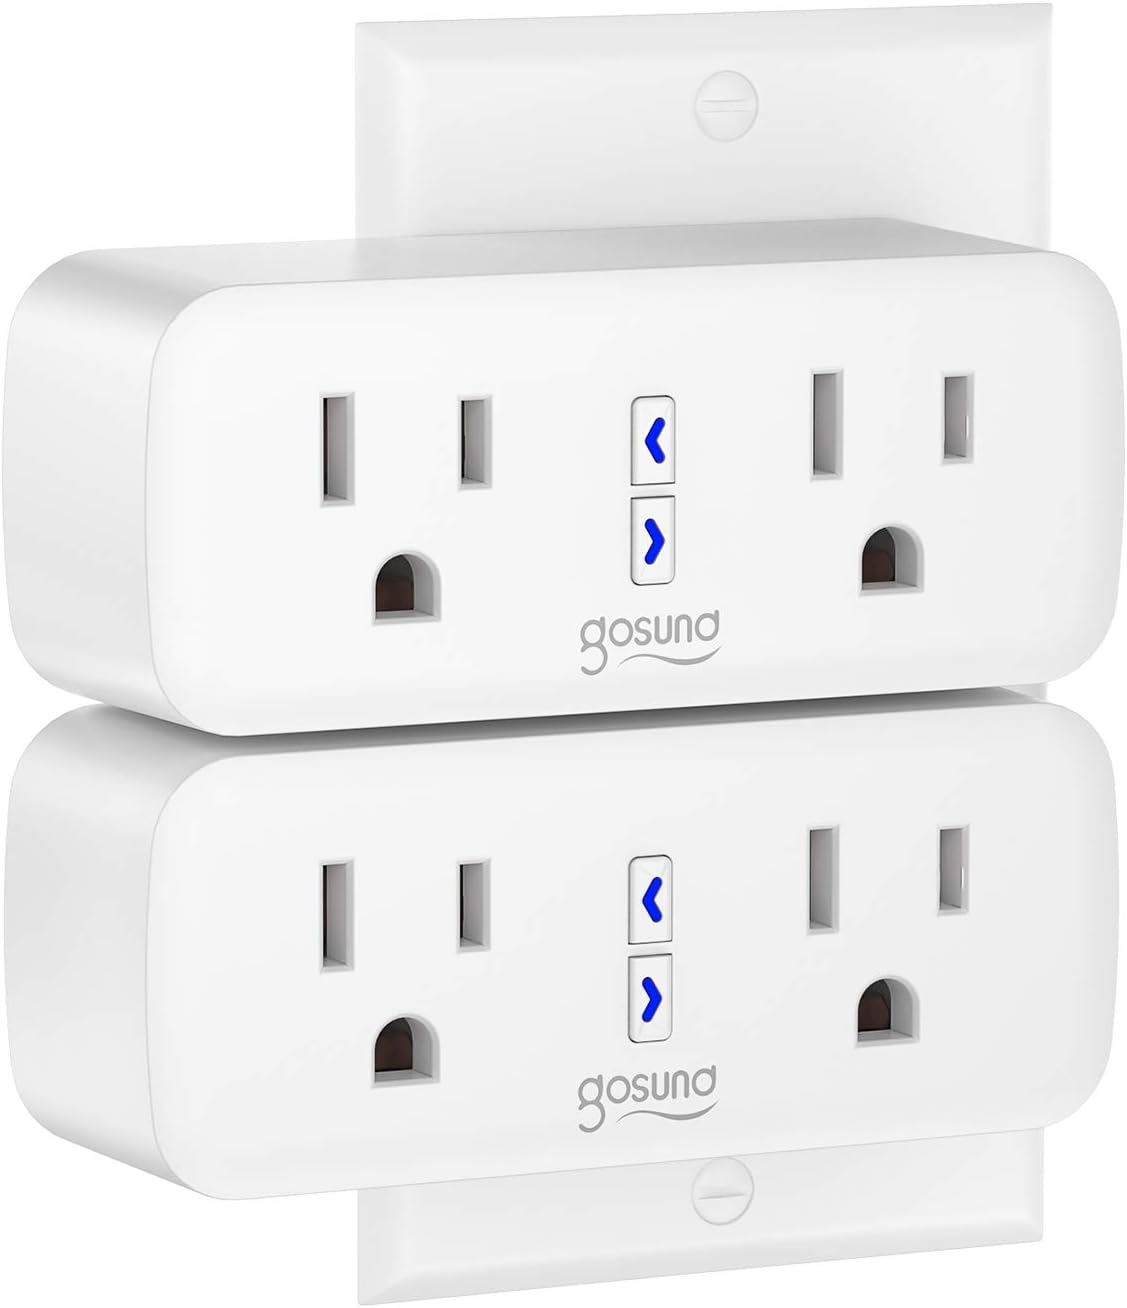 Gosund Wifi Smart Plug Outlet Dual Extender Mini Work with Alexa, Google Home, IFTTT, with Control Independently or Together, 10A, No Hub Required, FCC Listed (2 Pack)